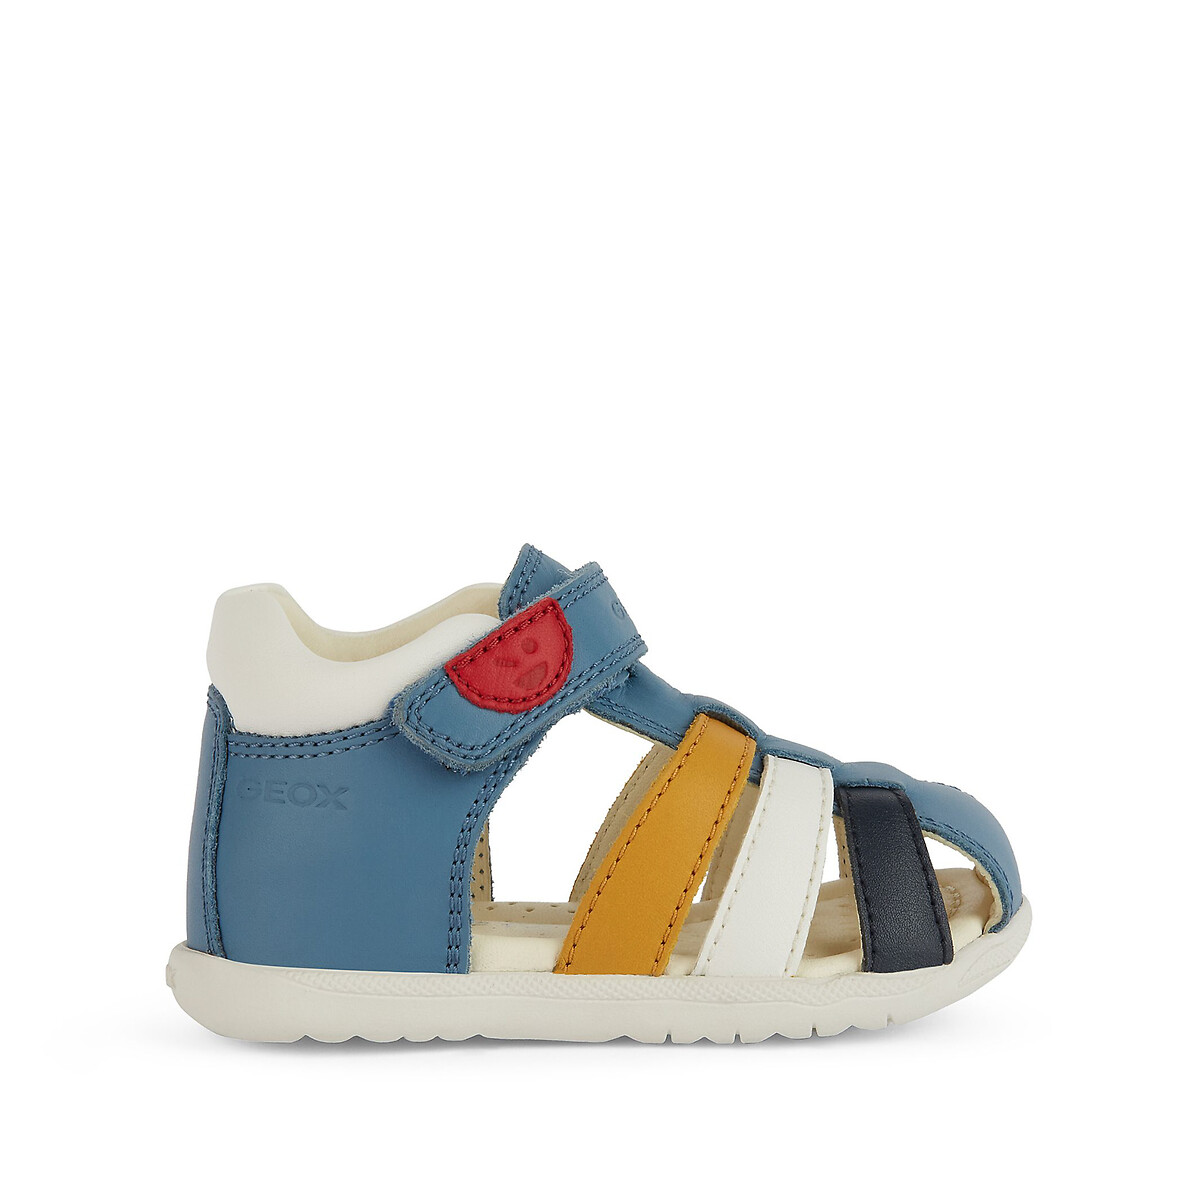 Image of Kids Macchia First Steps Sandals in Leather